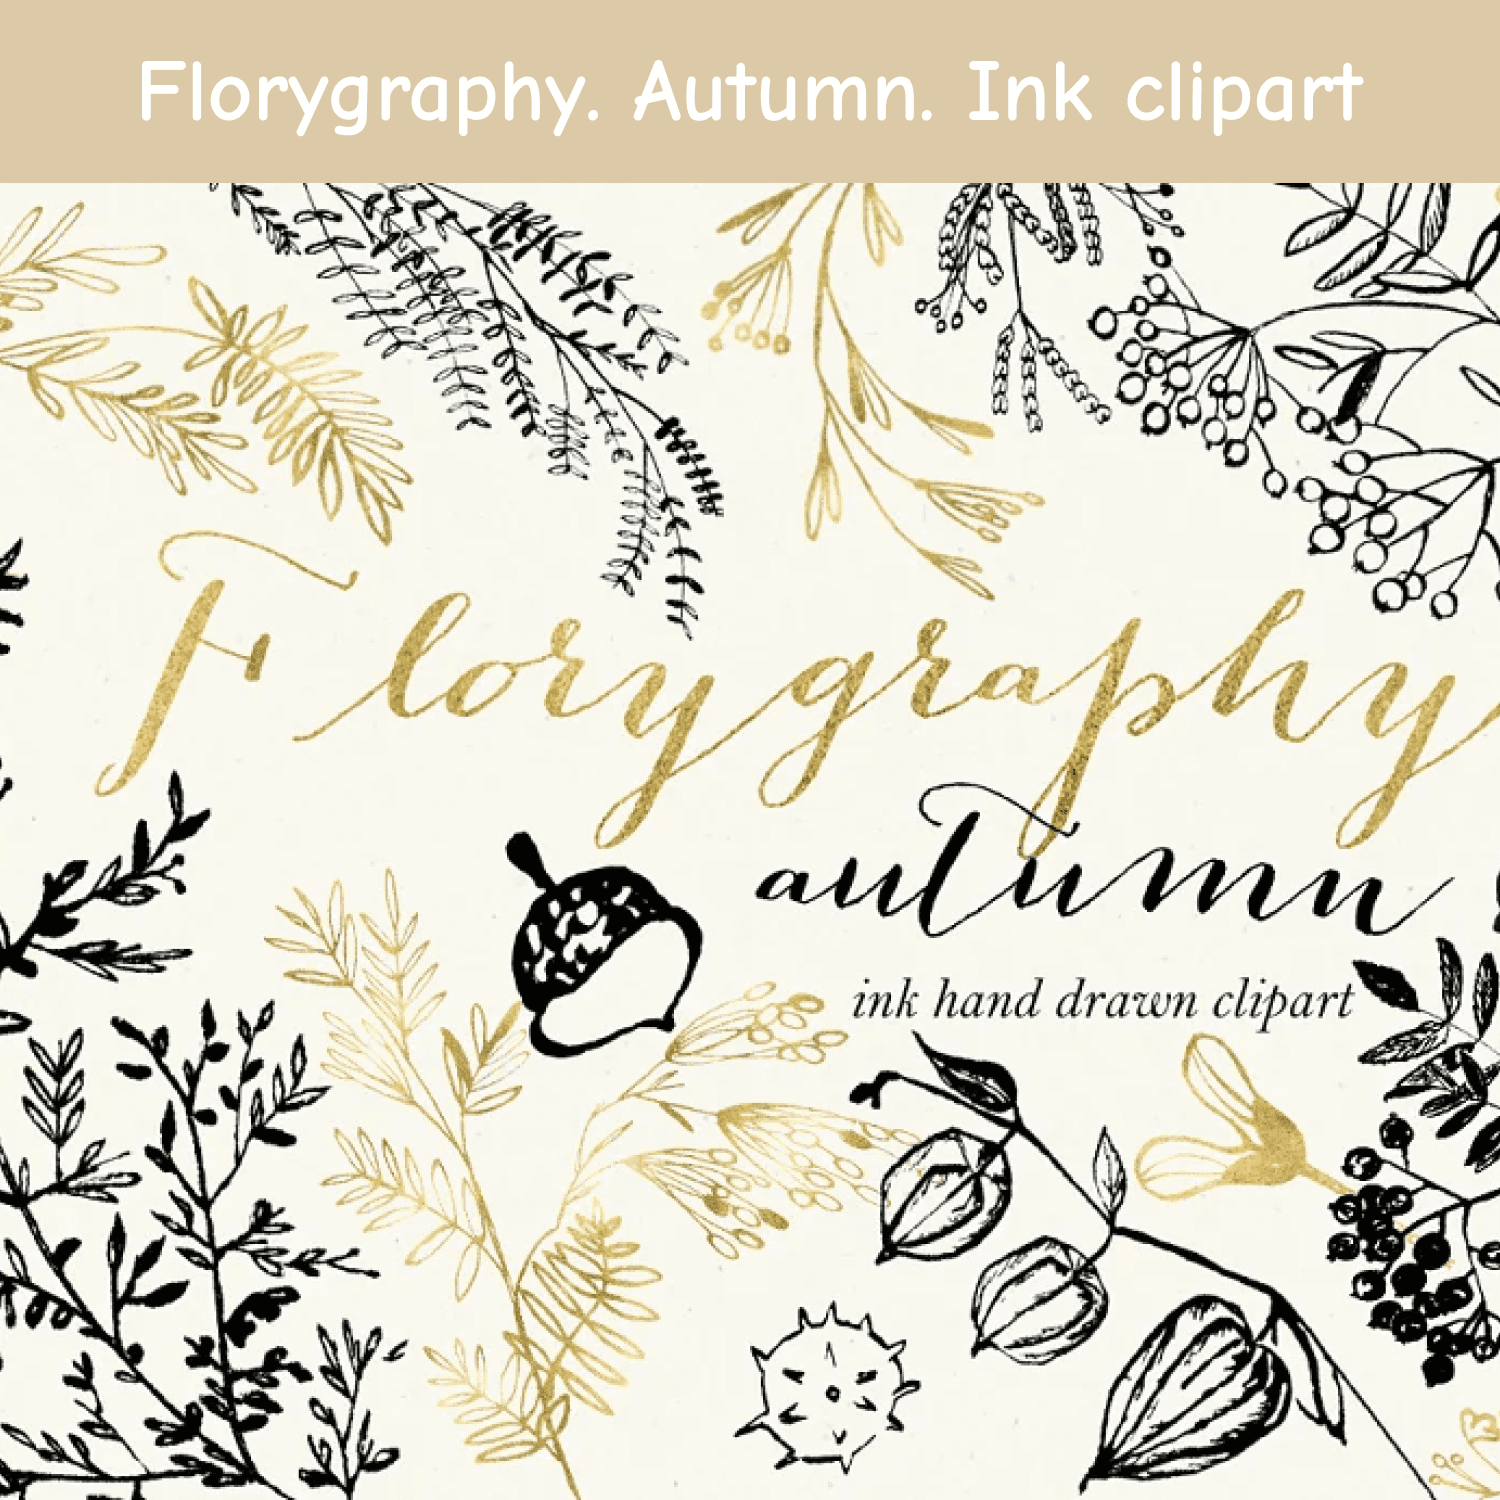 Florygraphy. Autumn. Ink clipart cover.